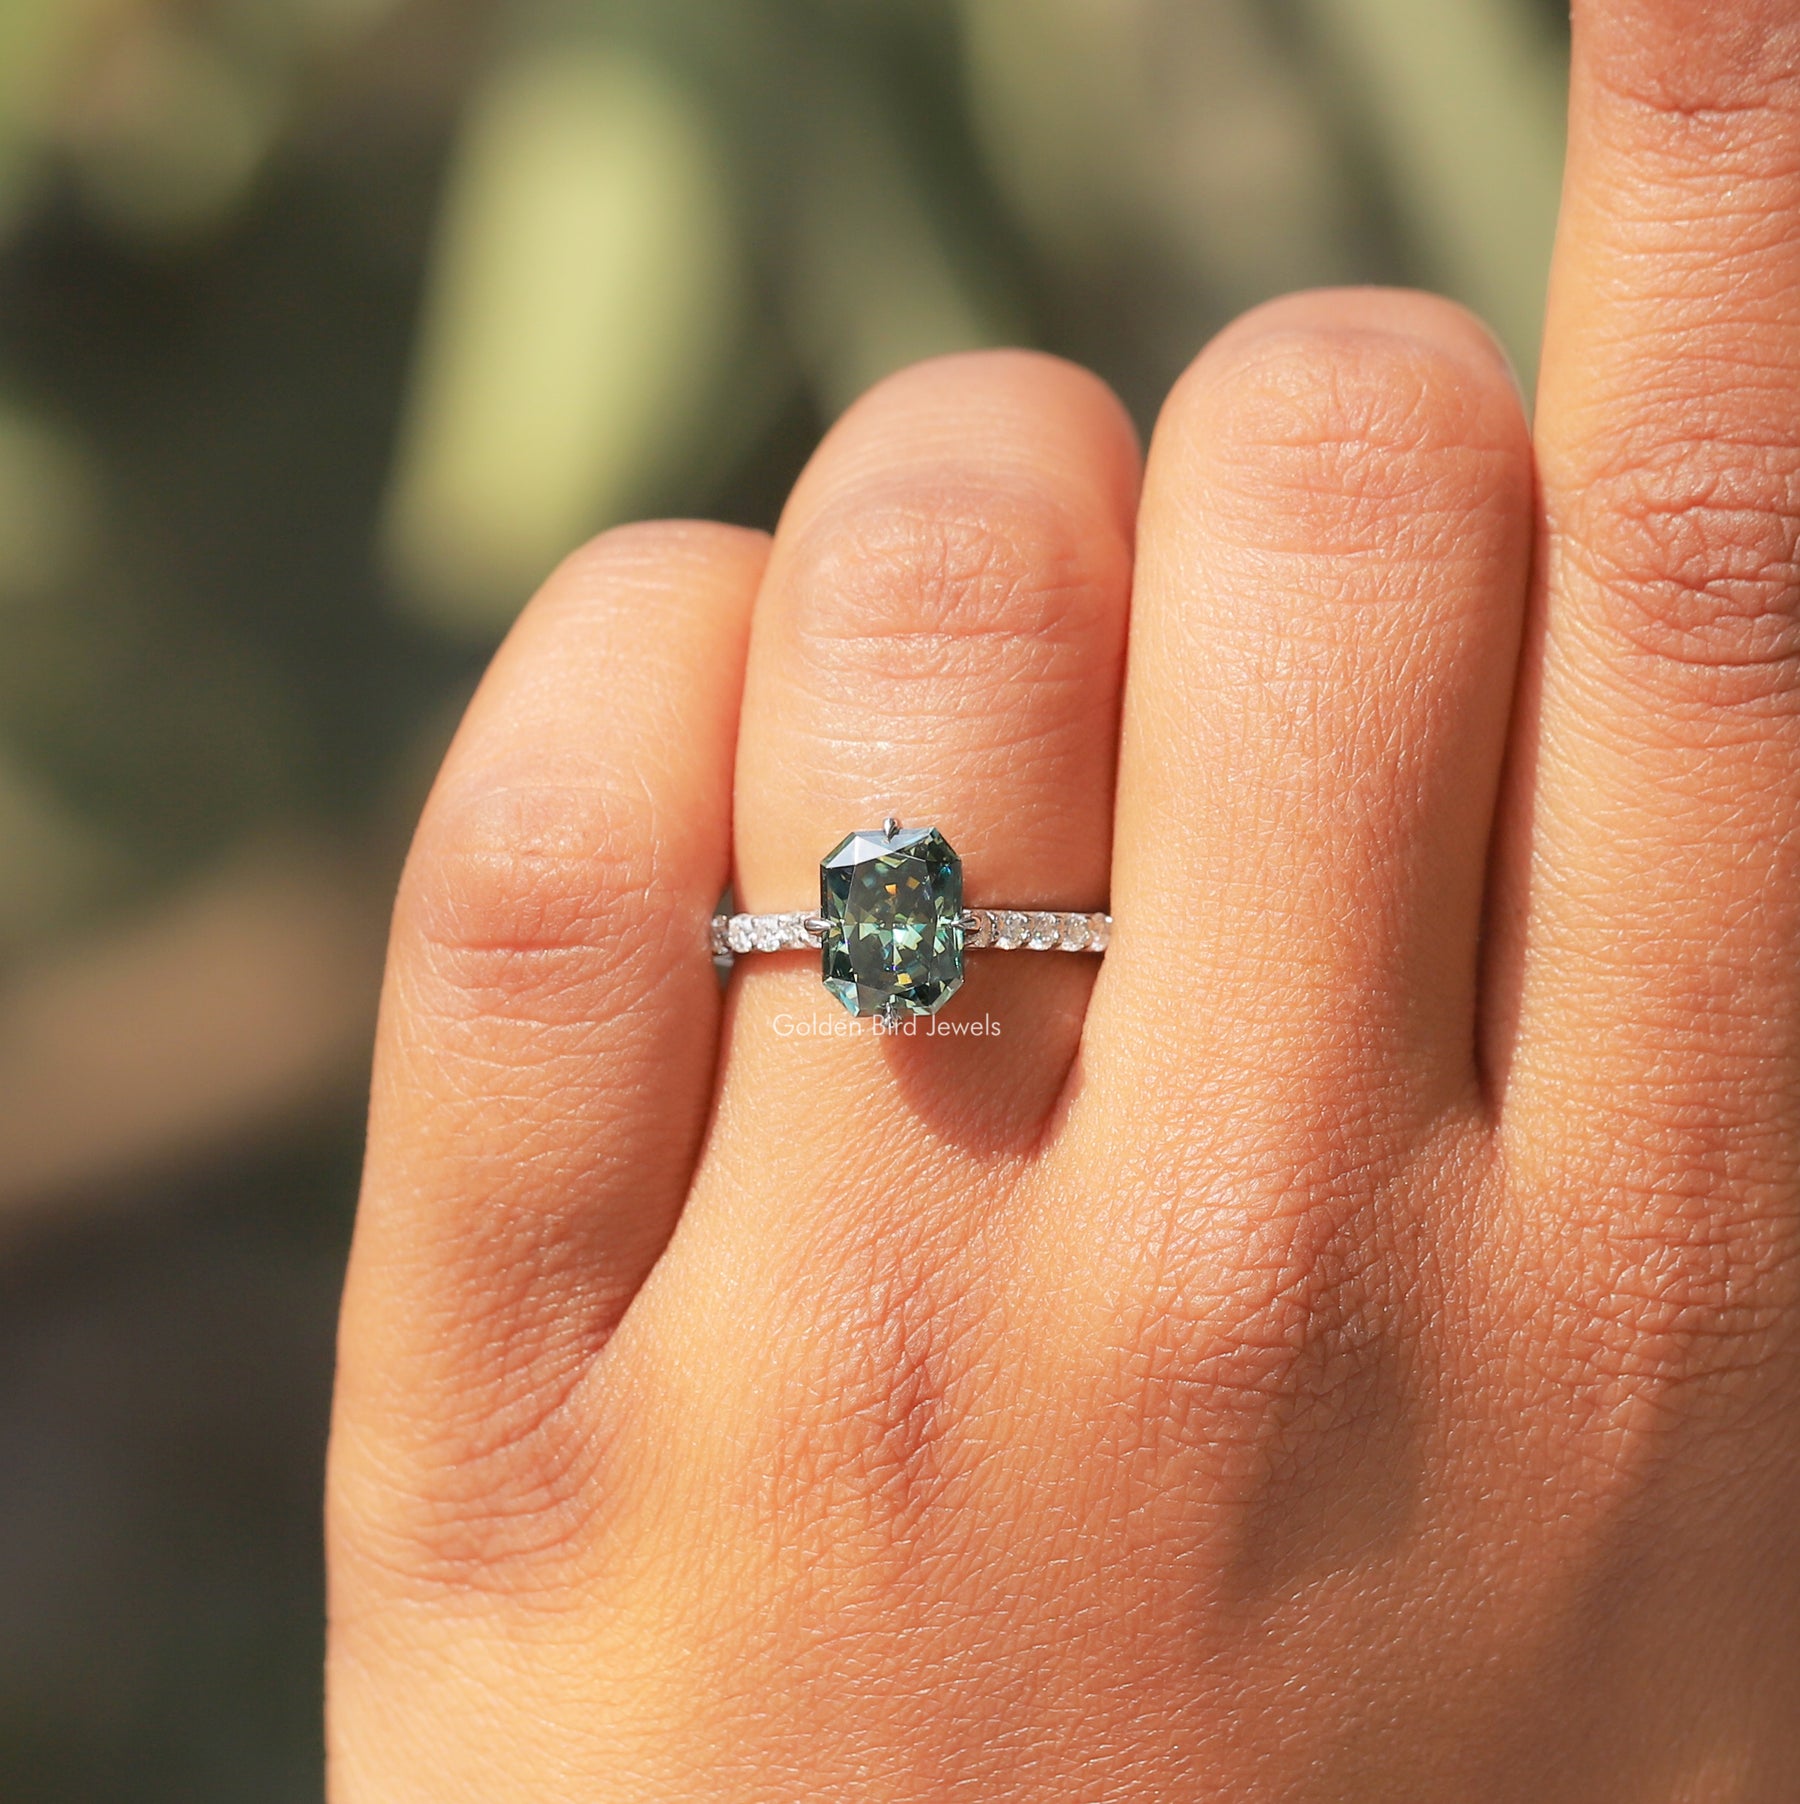 [In finger front view of green radiant cut moissanite ring made of prong setting]-[Golden Bird Jewels]